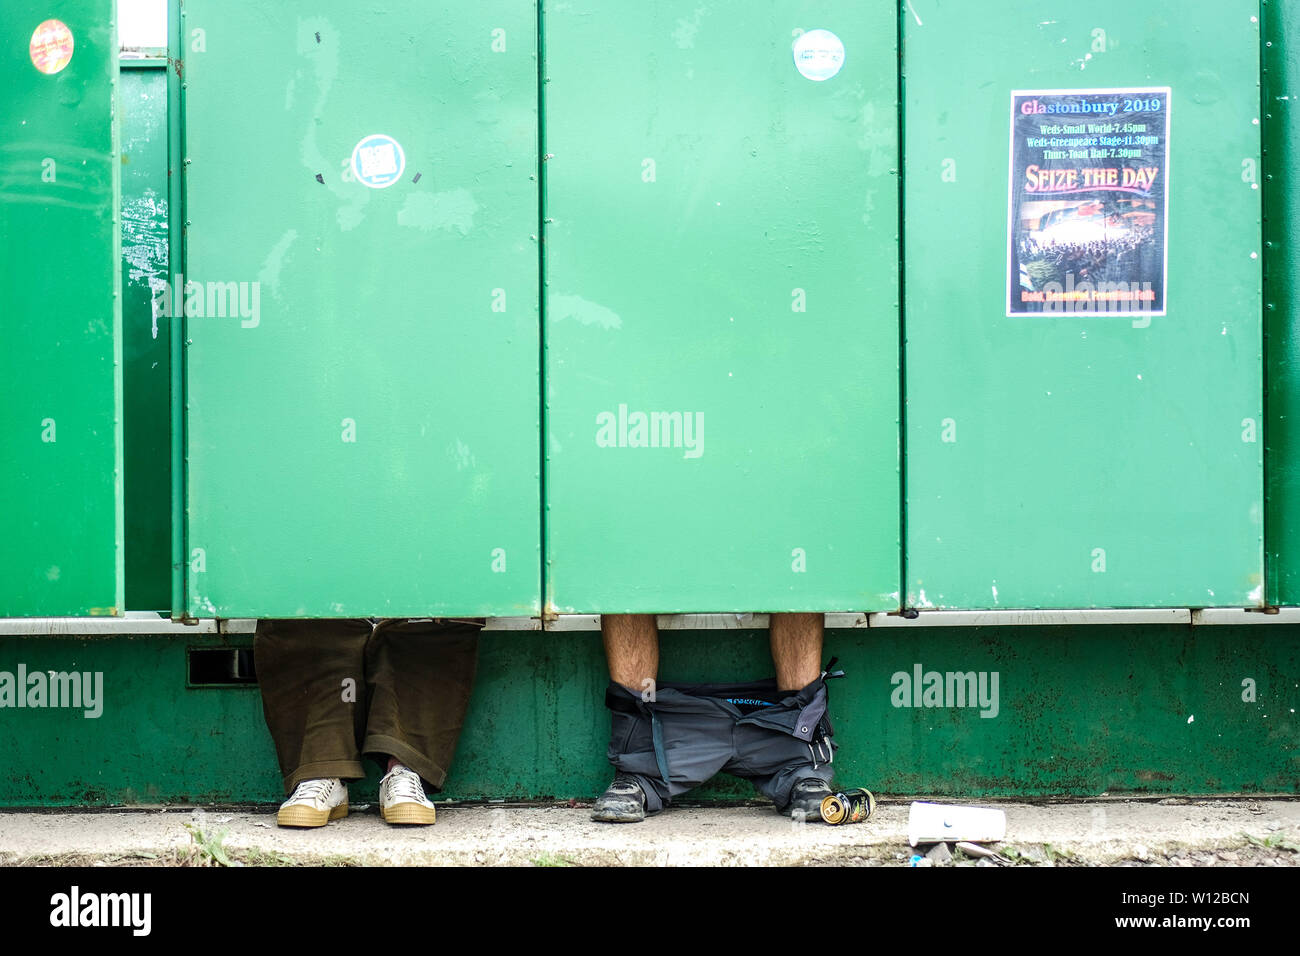 Glastonbury, Somerset, UK. 29th June, 2019. Feet under the green doors of the toilets at Glastonbury Festival 2019 on Saturday 29 June 2019 at Worthy Farm, Pilton. Picture by Credit: Julie Edwards/Alamy Live News Stock Photo